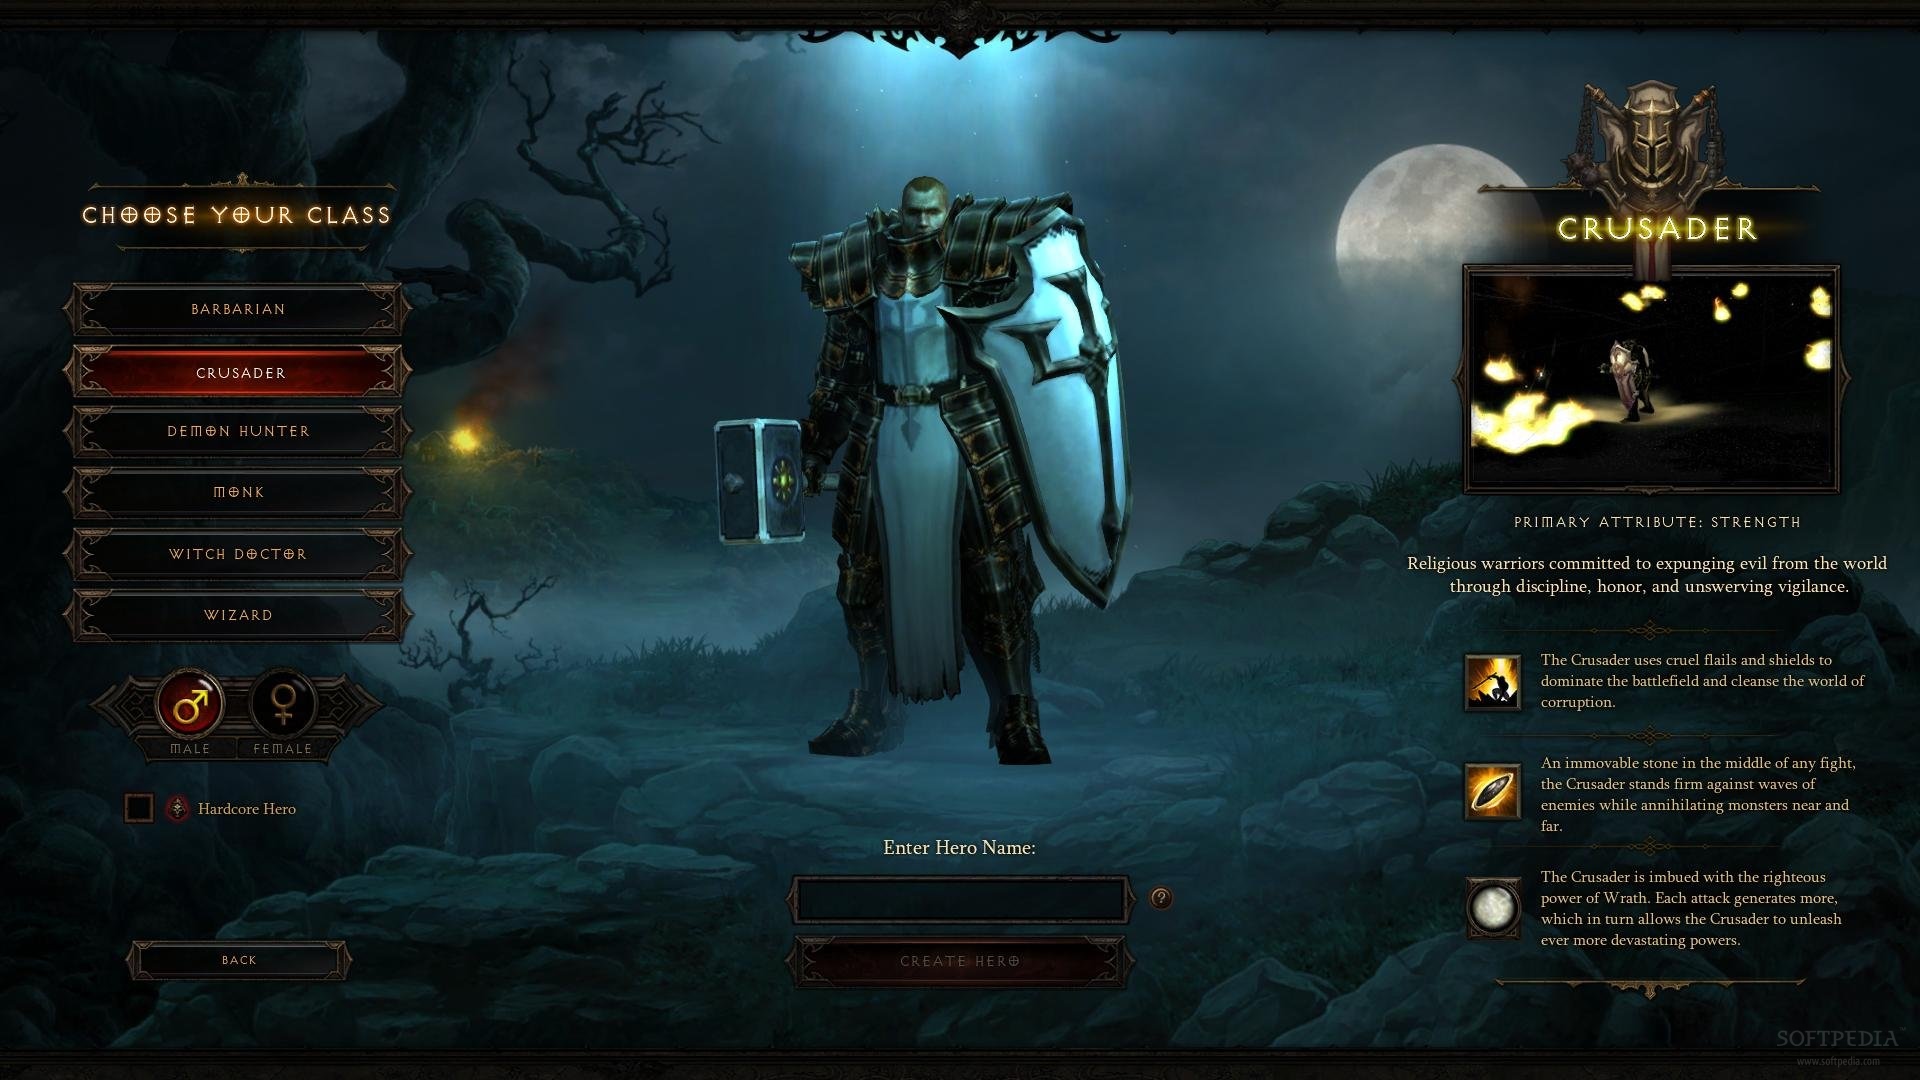 how to get diablo 3 reaper of souls for free pc